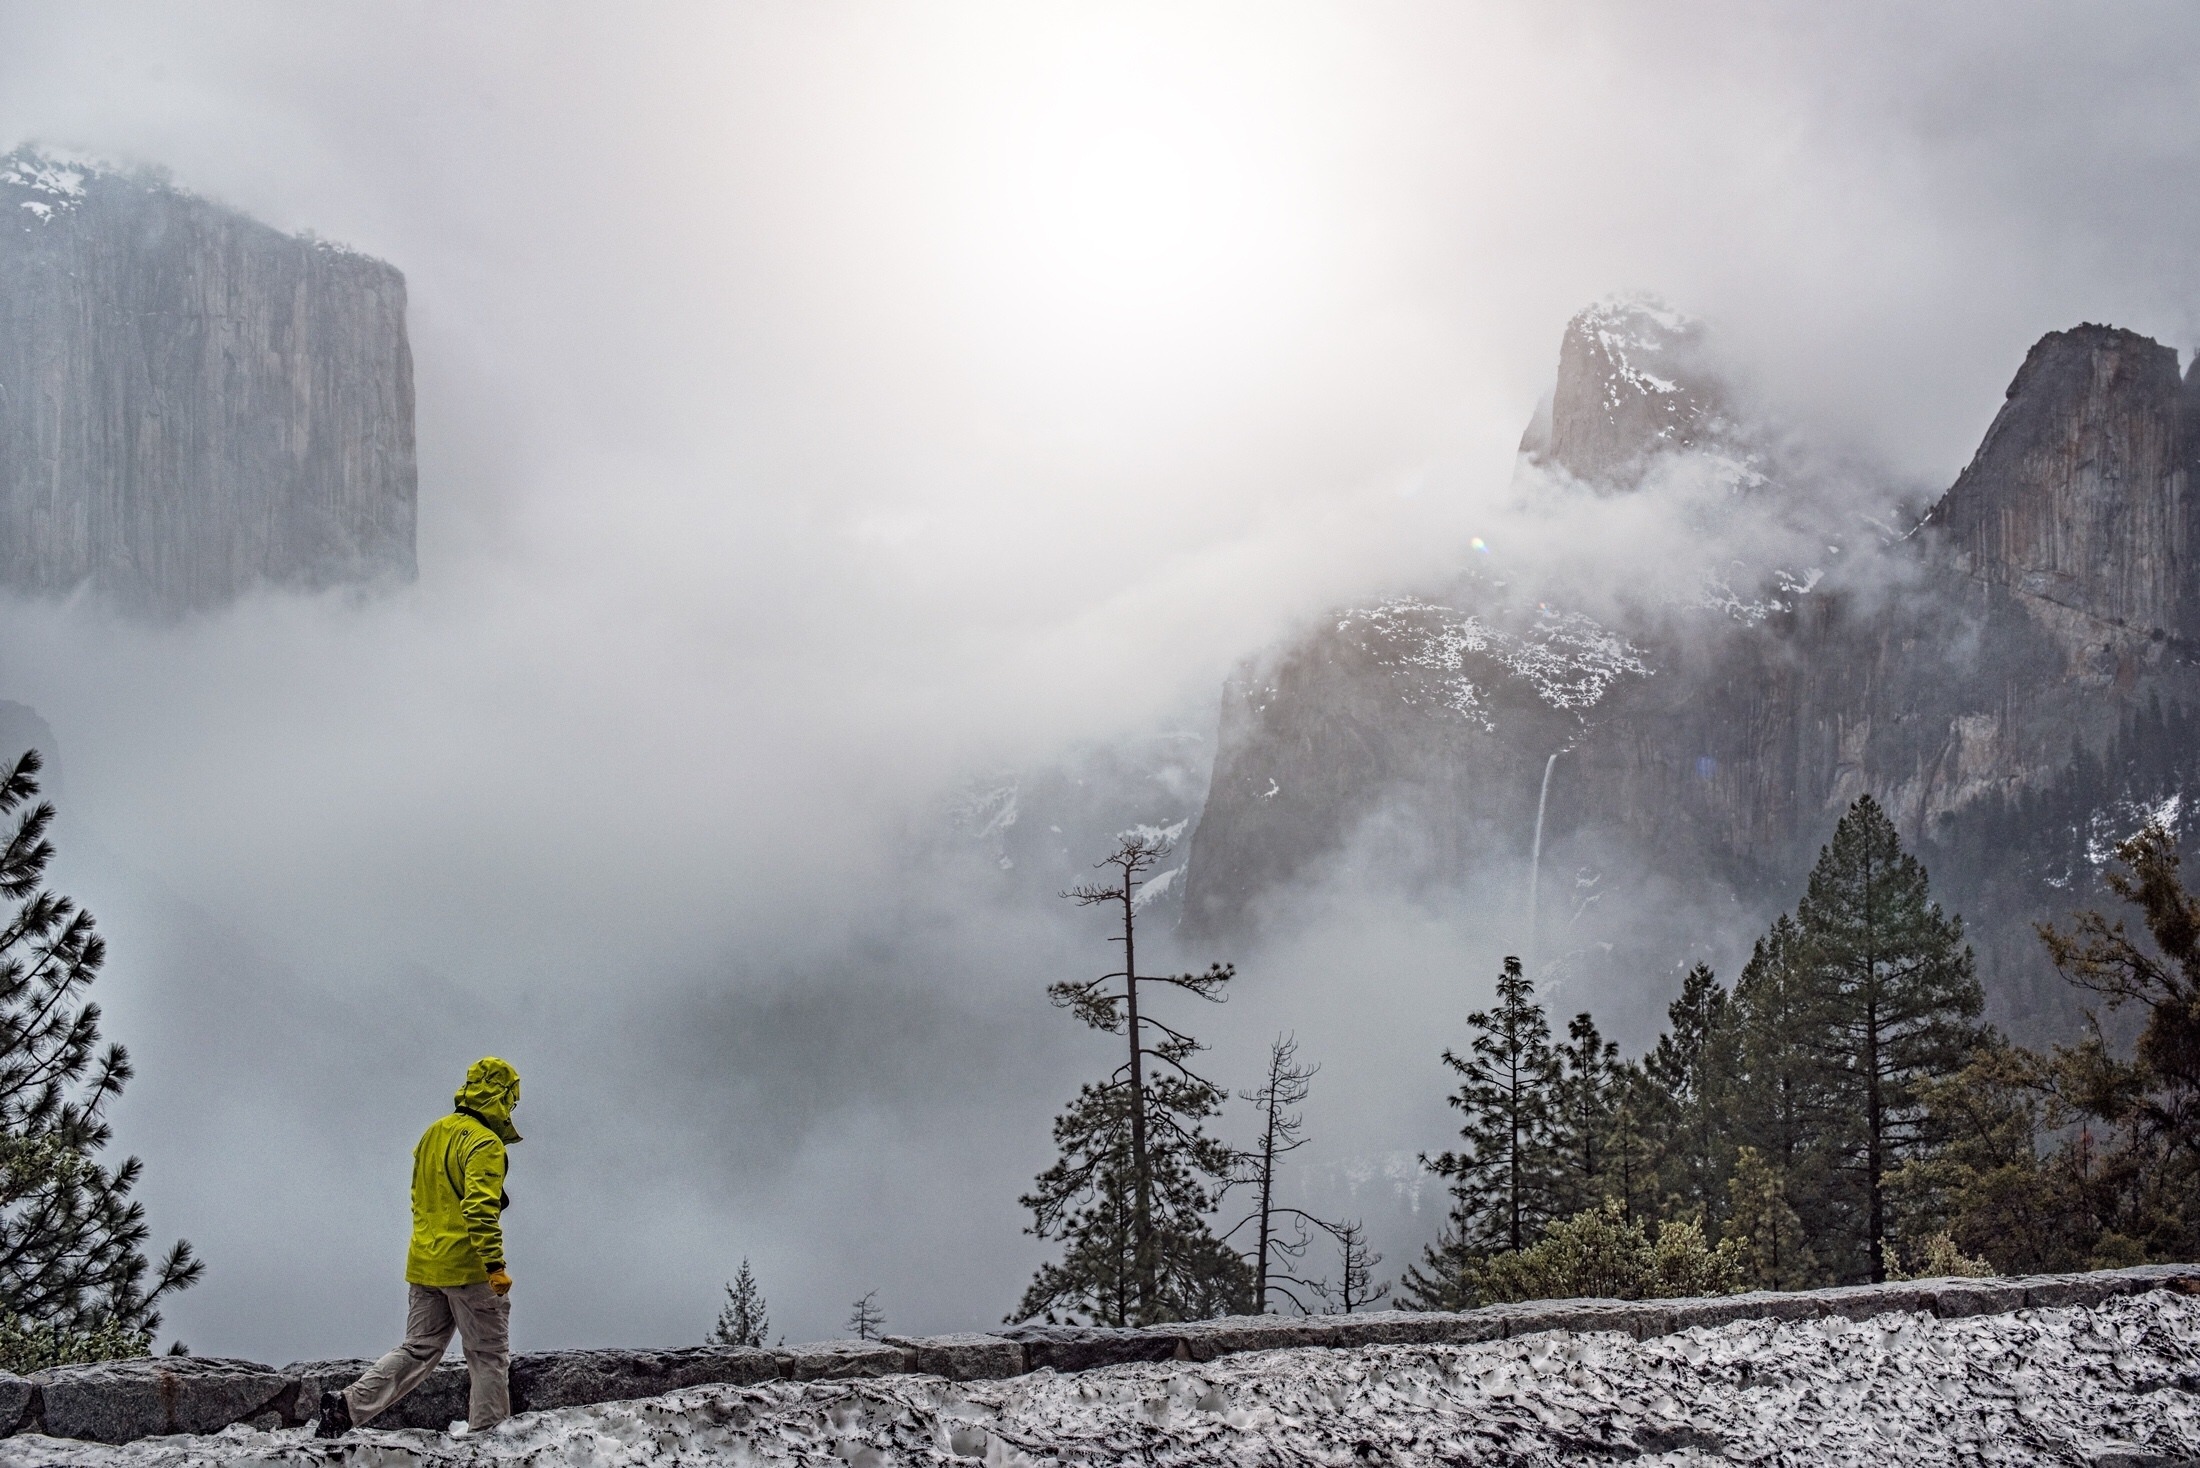 A quiet, snow moment at Tunnel View. Photo: Jayms Ramirez